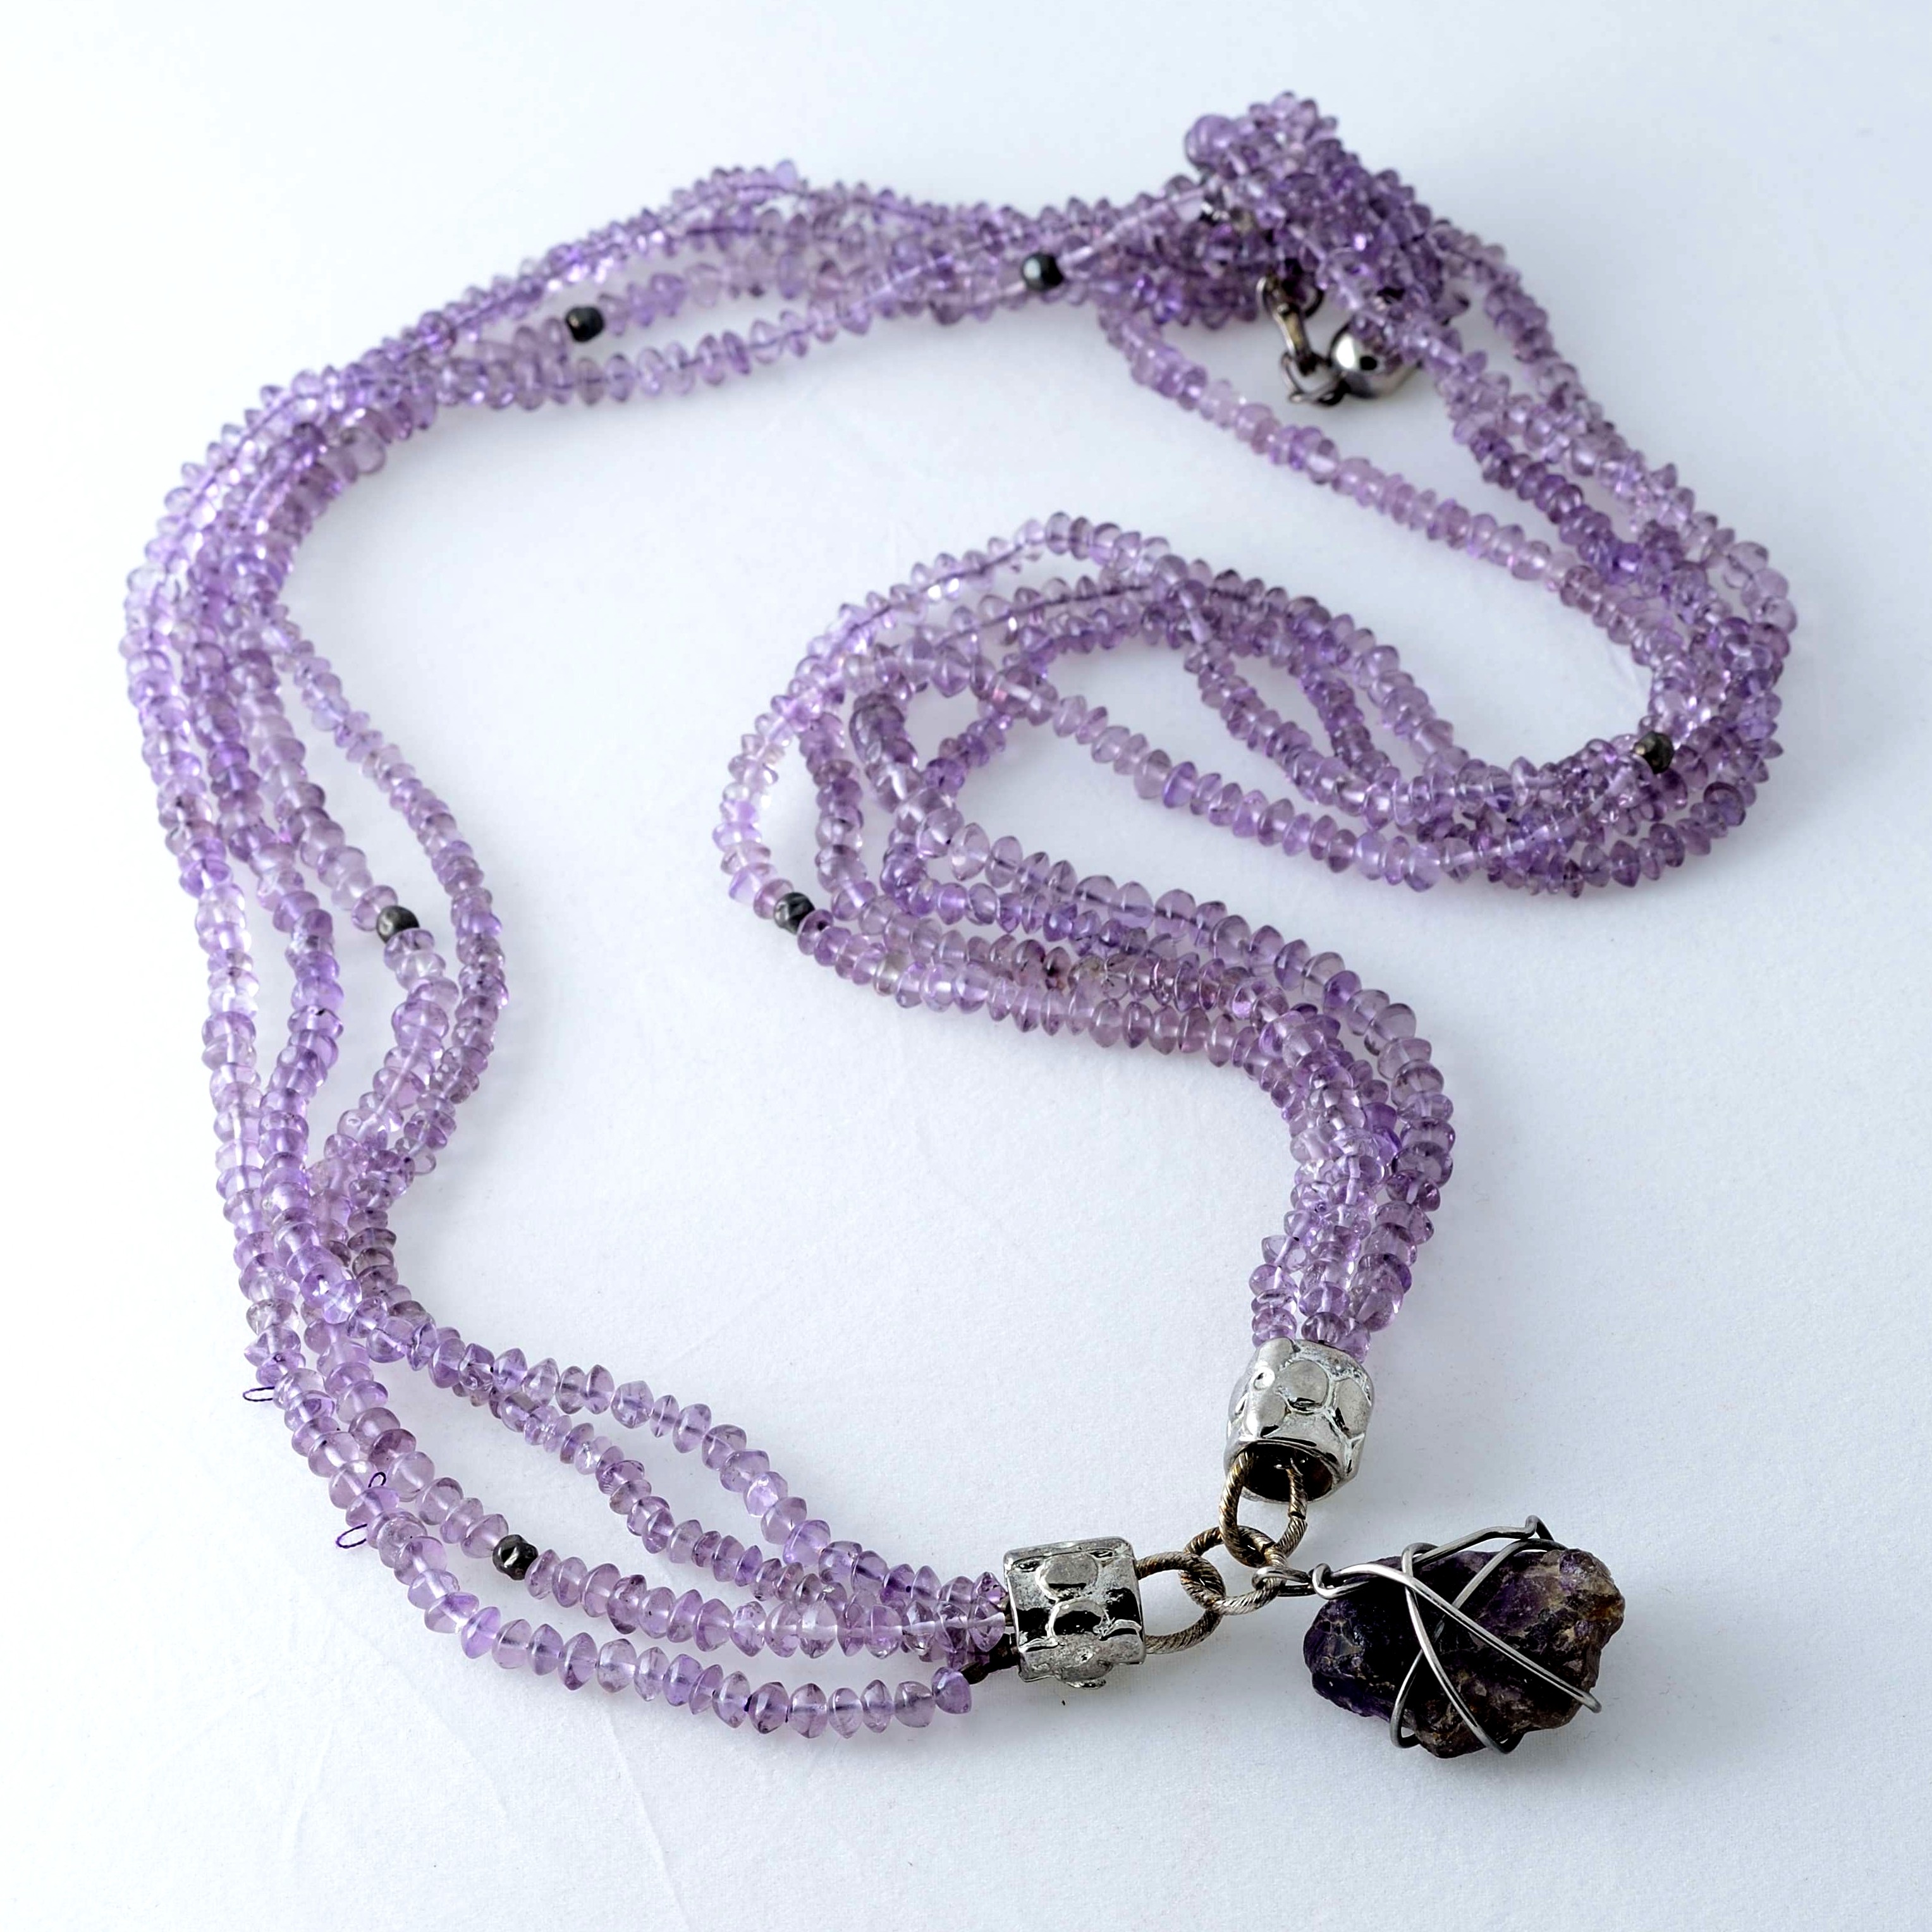 Amethyst stone necklace